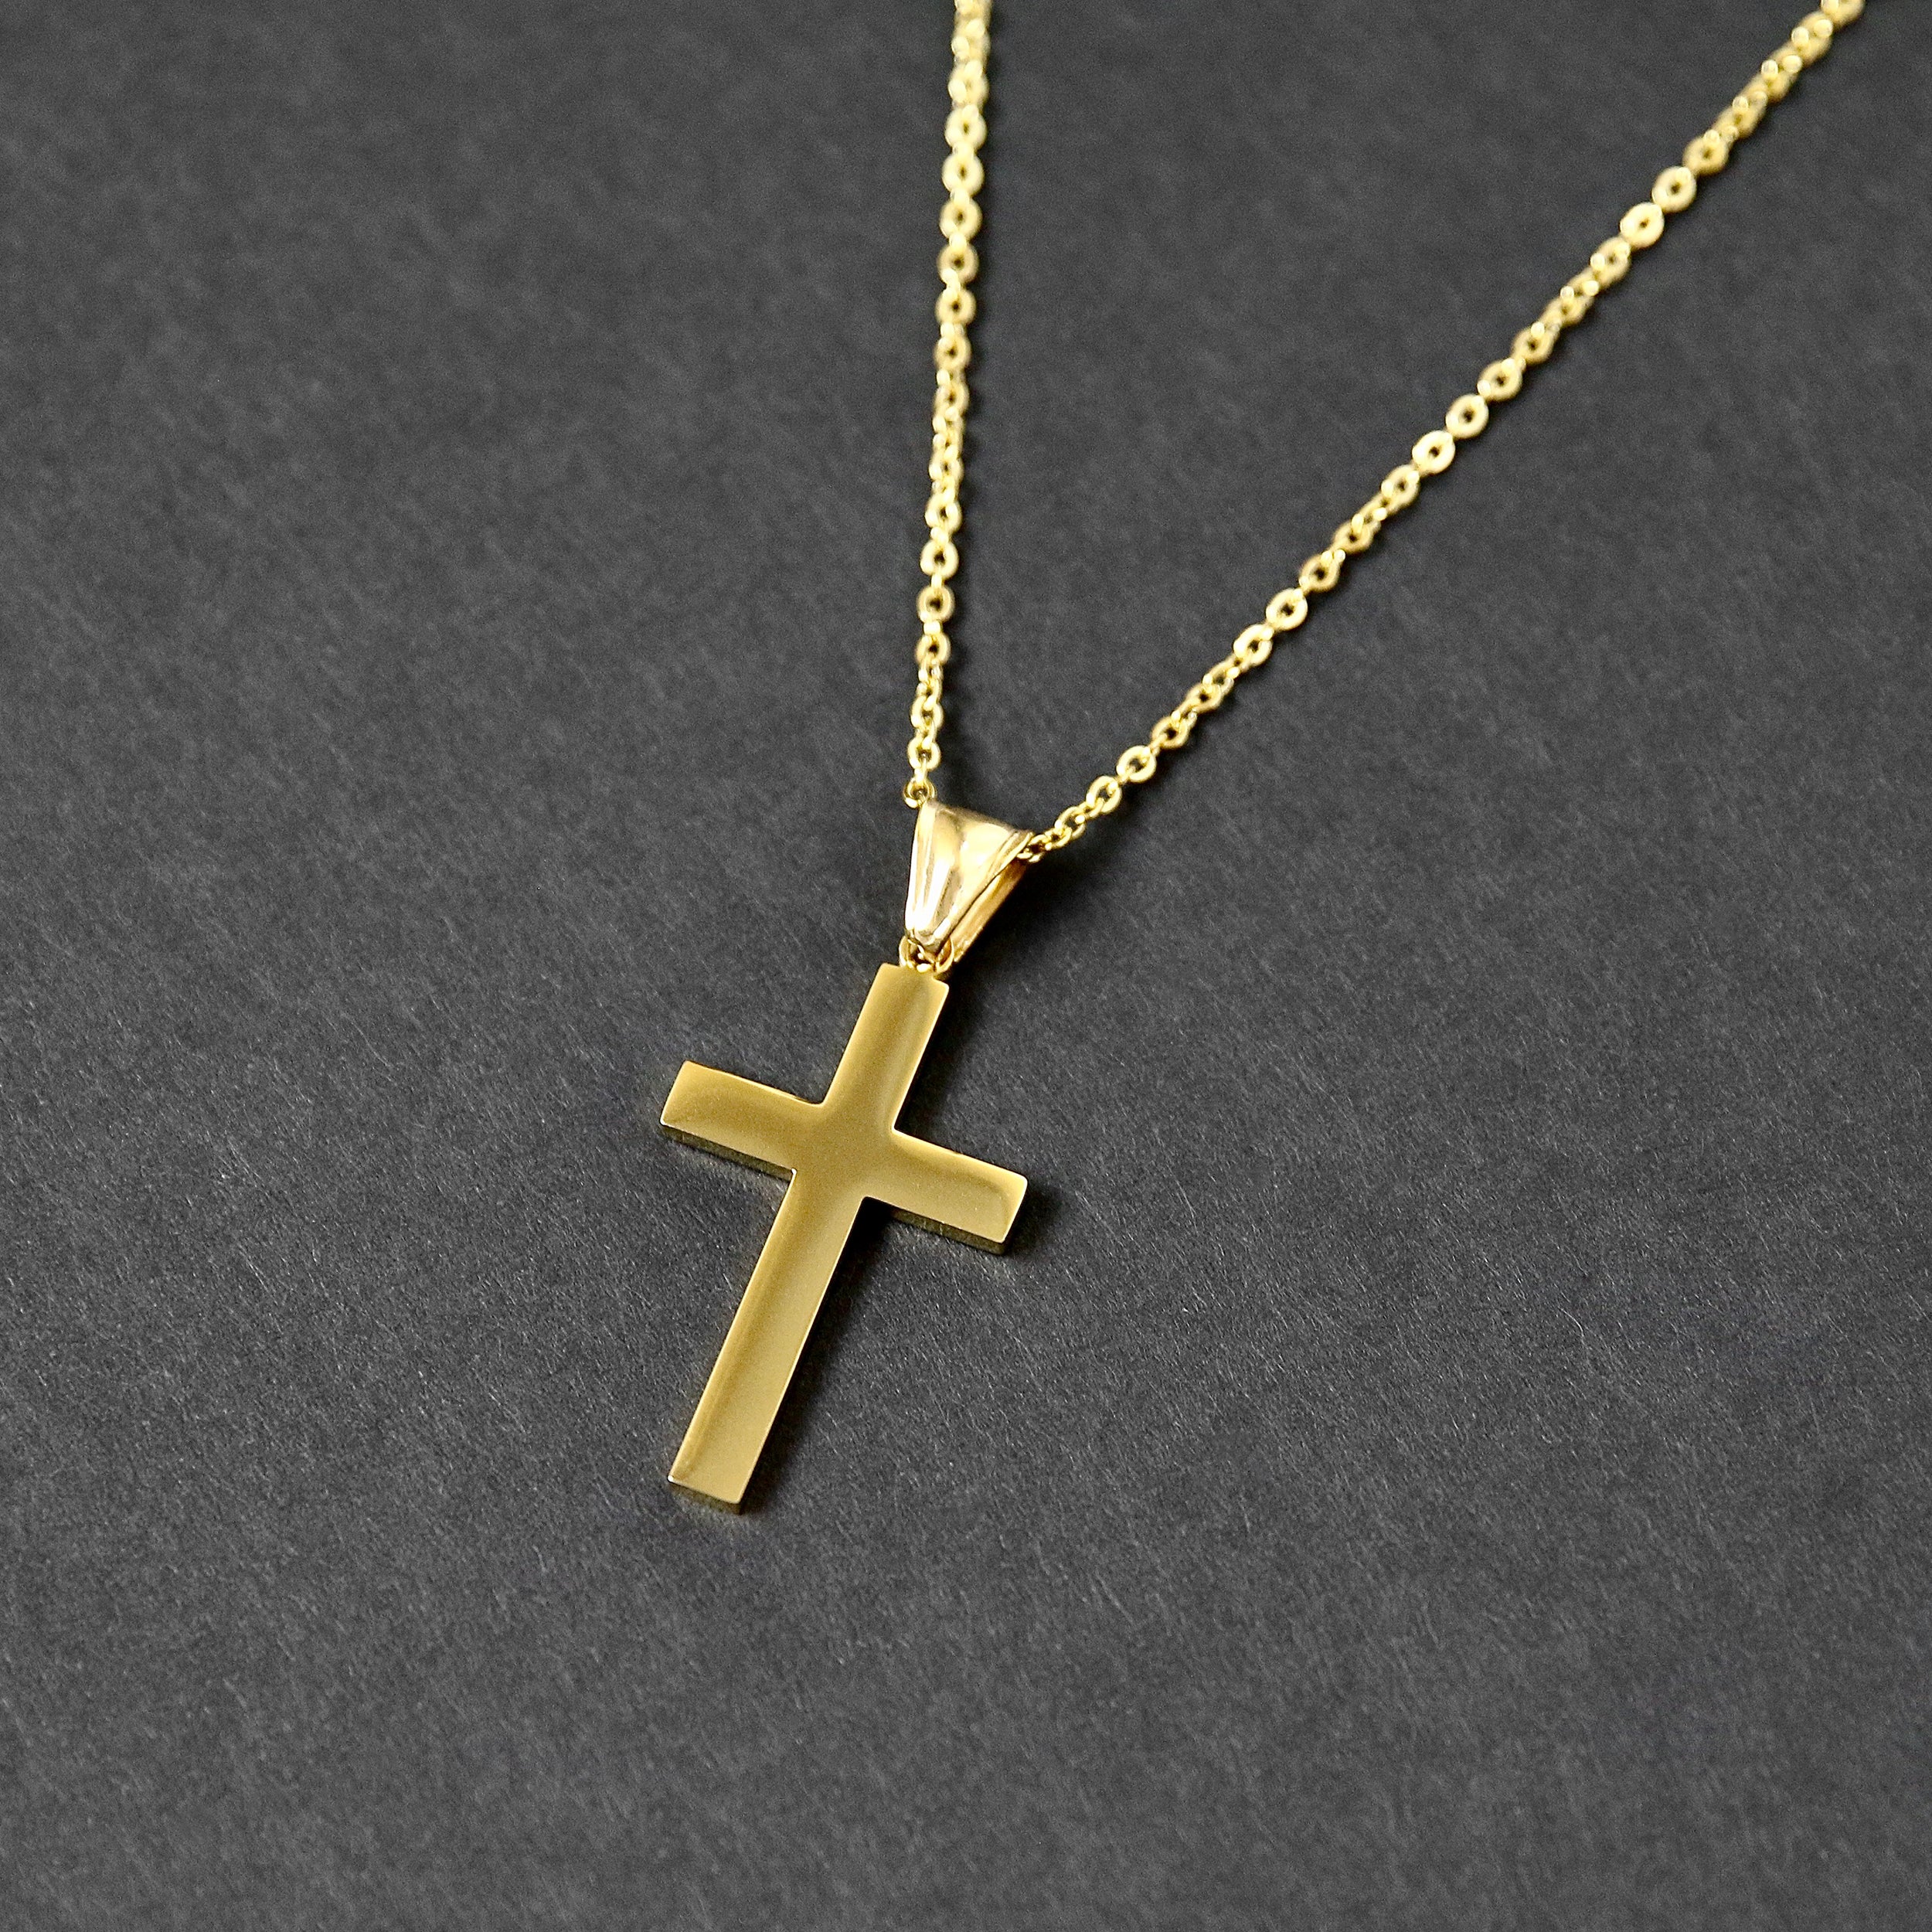 Large Modern Cross Necklace  - Gold